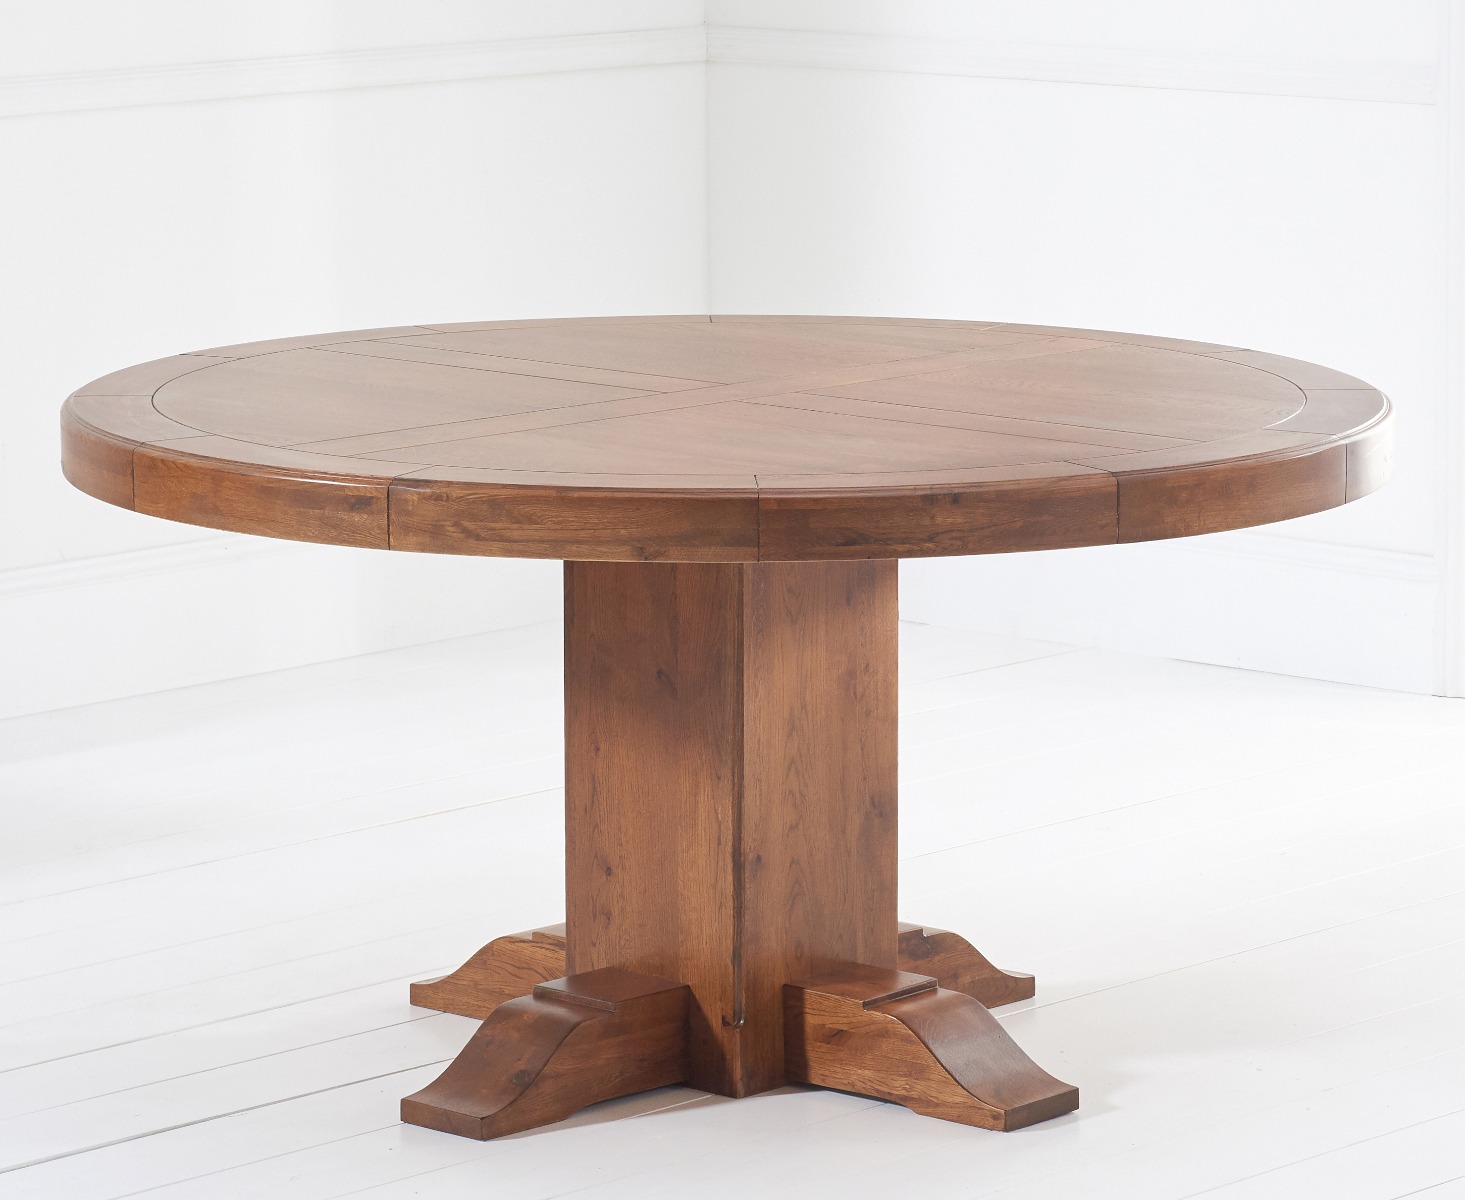 Photo 4 of Helmsley 150cm dark oak round pedestal dining table with 4 grey keswick chairs